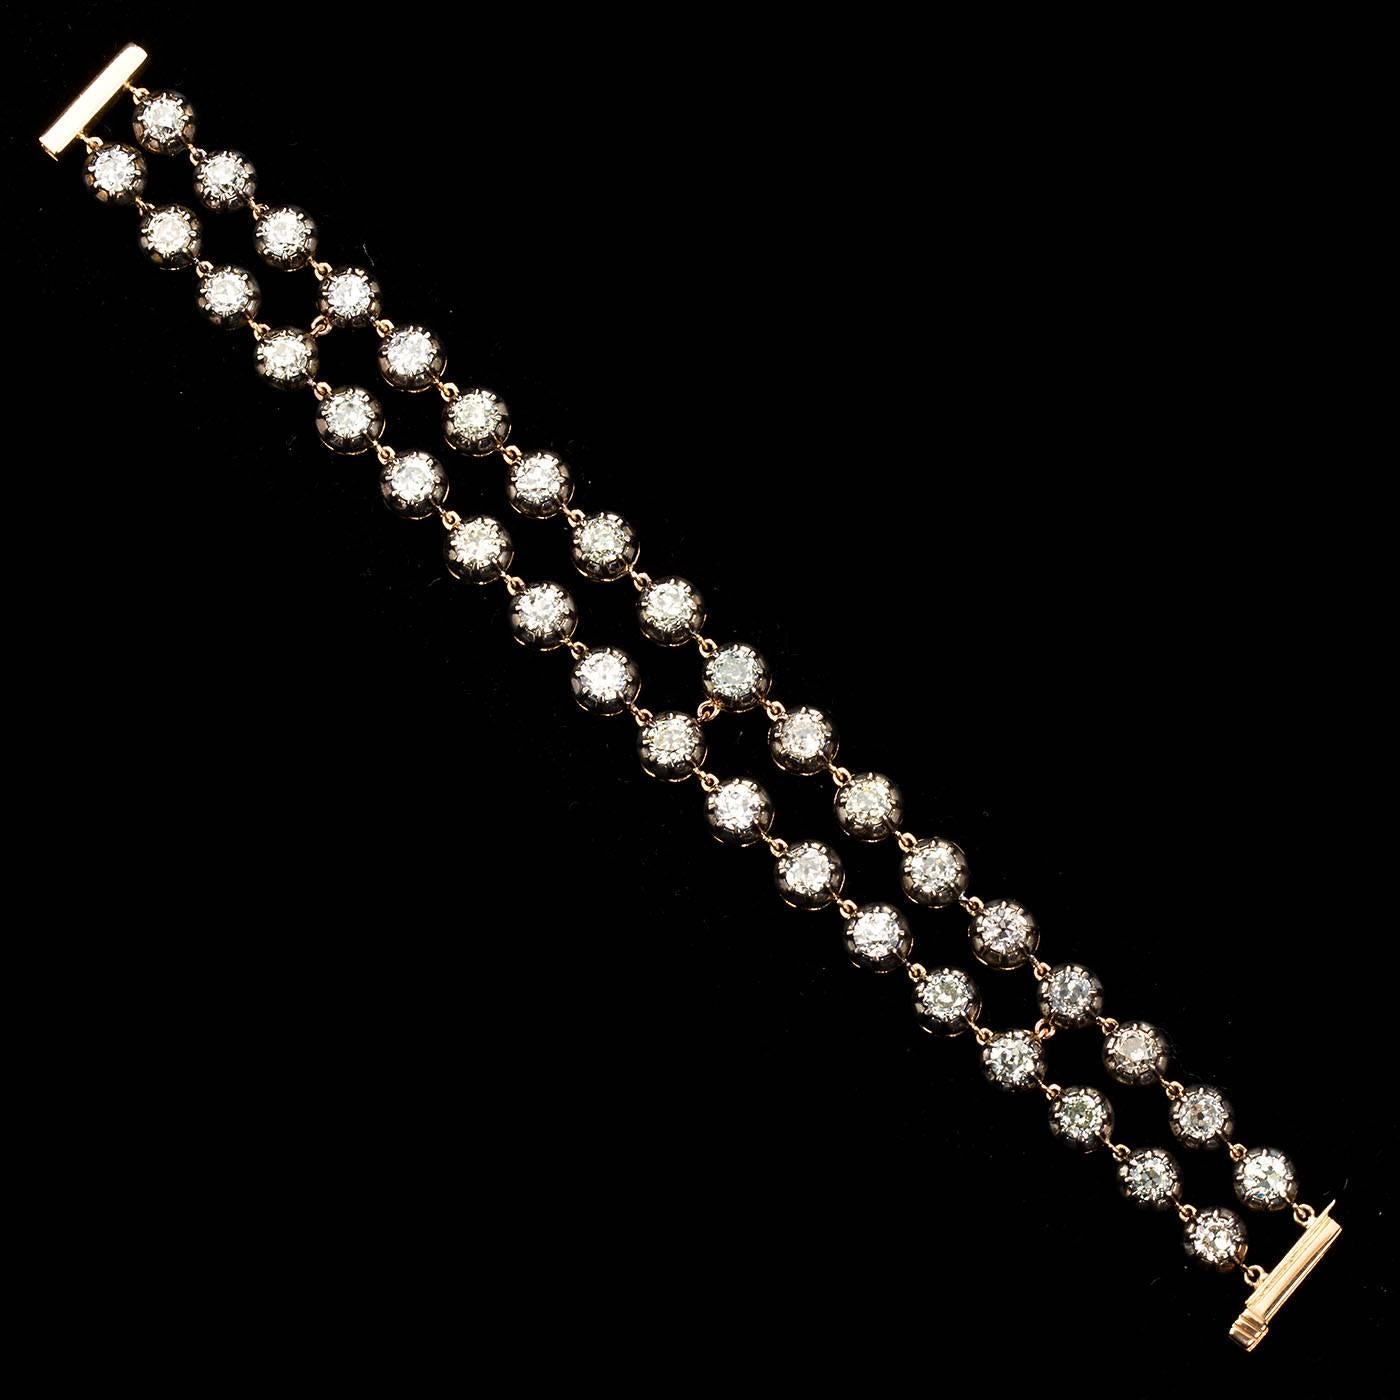 A remarkable antique style silver-on-gold double row Tennis bracelet with 36 old European diamonds weighing 20.80 ctw. Diamonds are high clarity (VS) and range in color from H-J color.  An exceptional find.

Measures 7-1/4